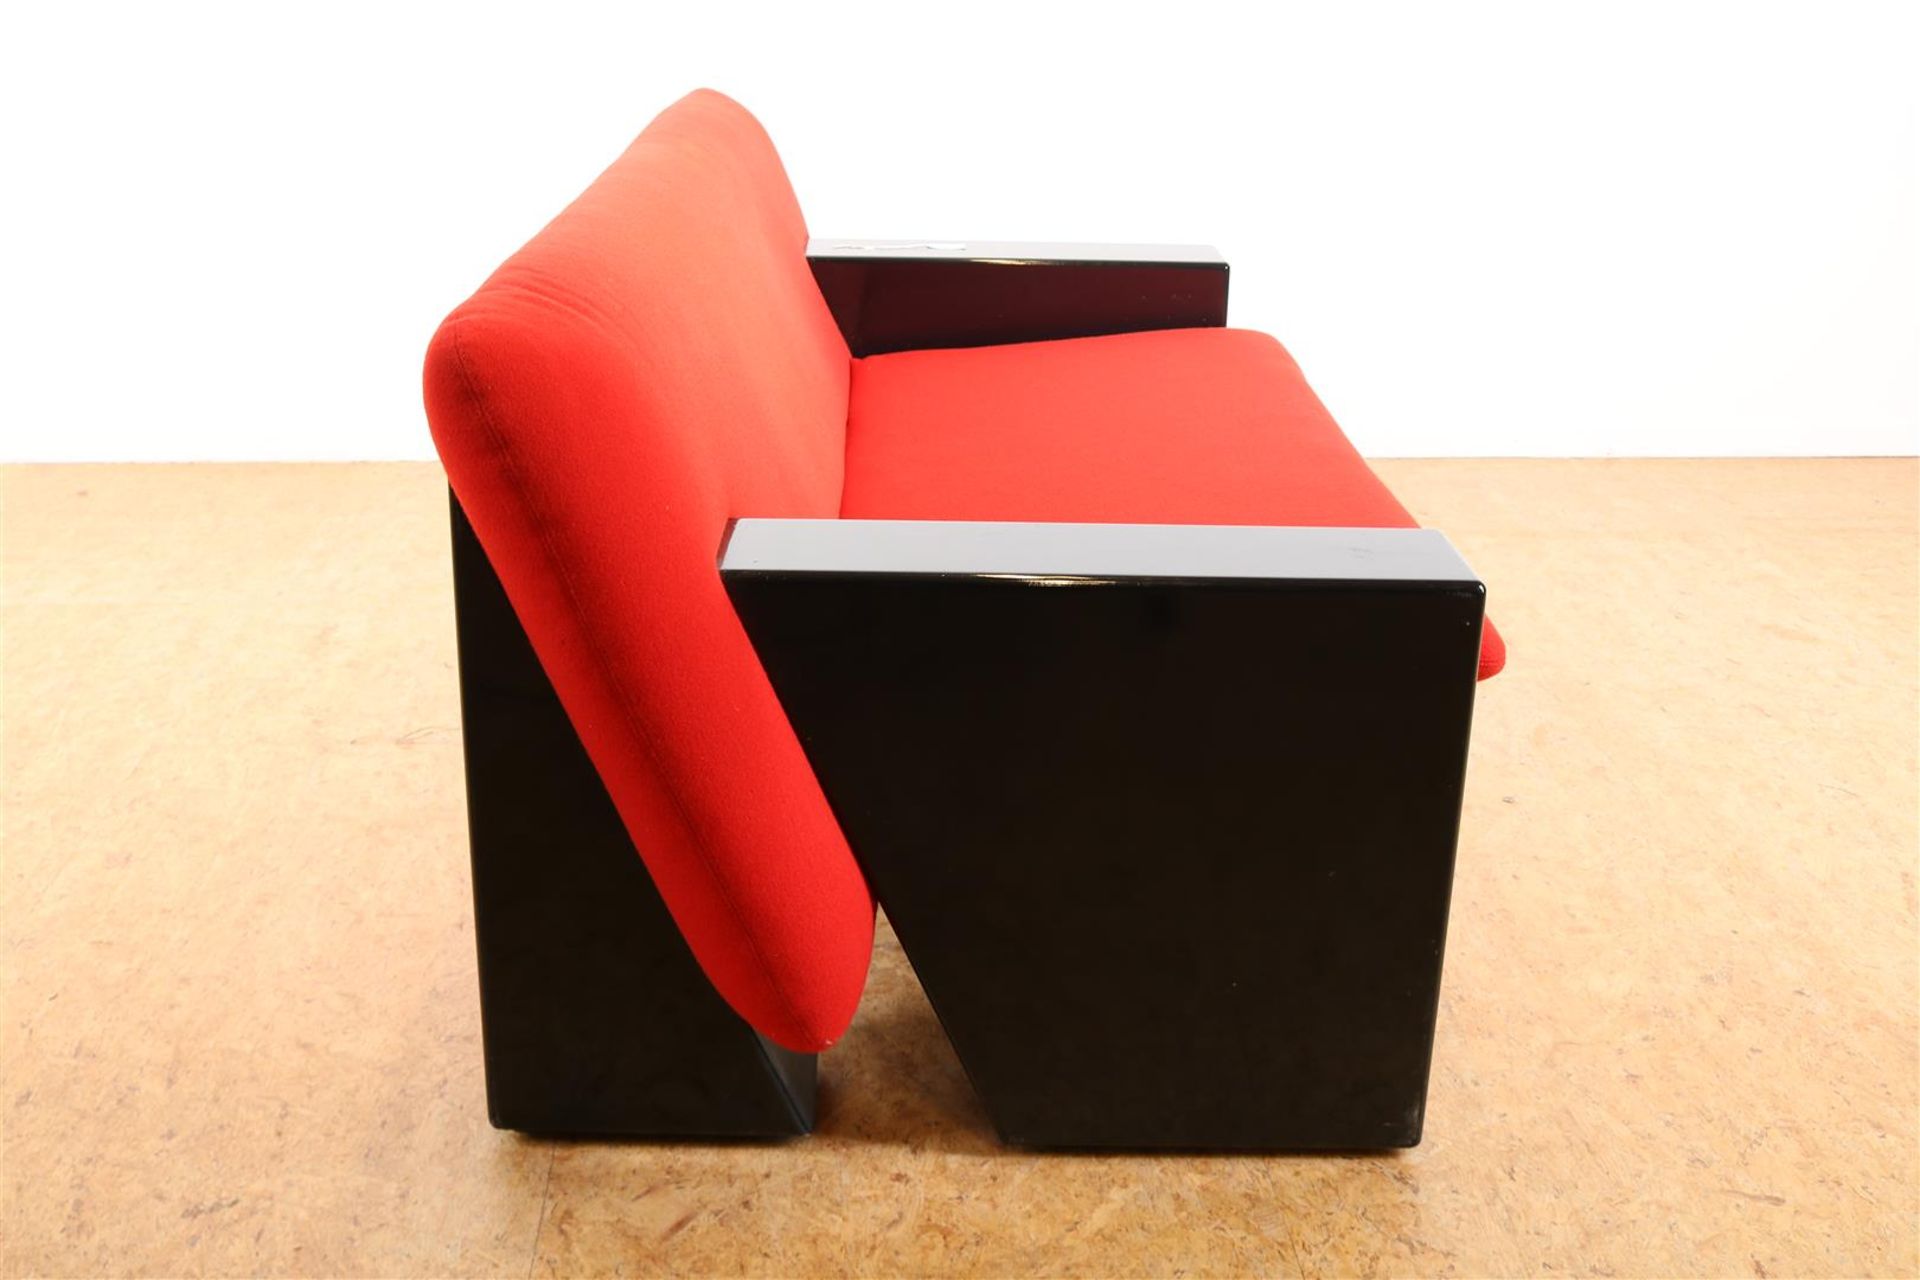 Two-seater sofa with red fabric upholstery and black wooden base, model “Sandwich” (model 750), - Image 3 of 4